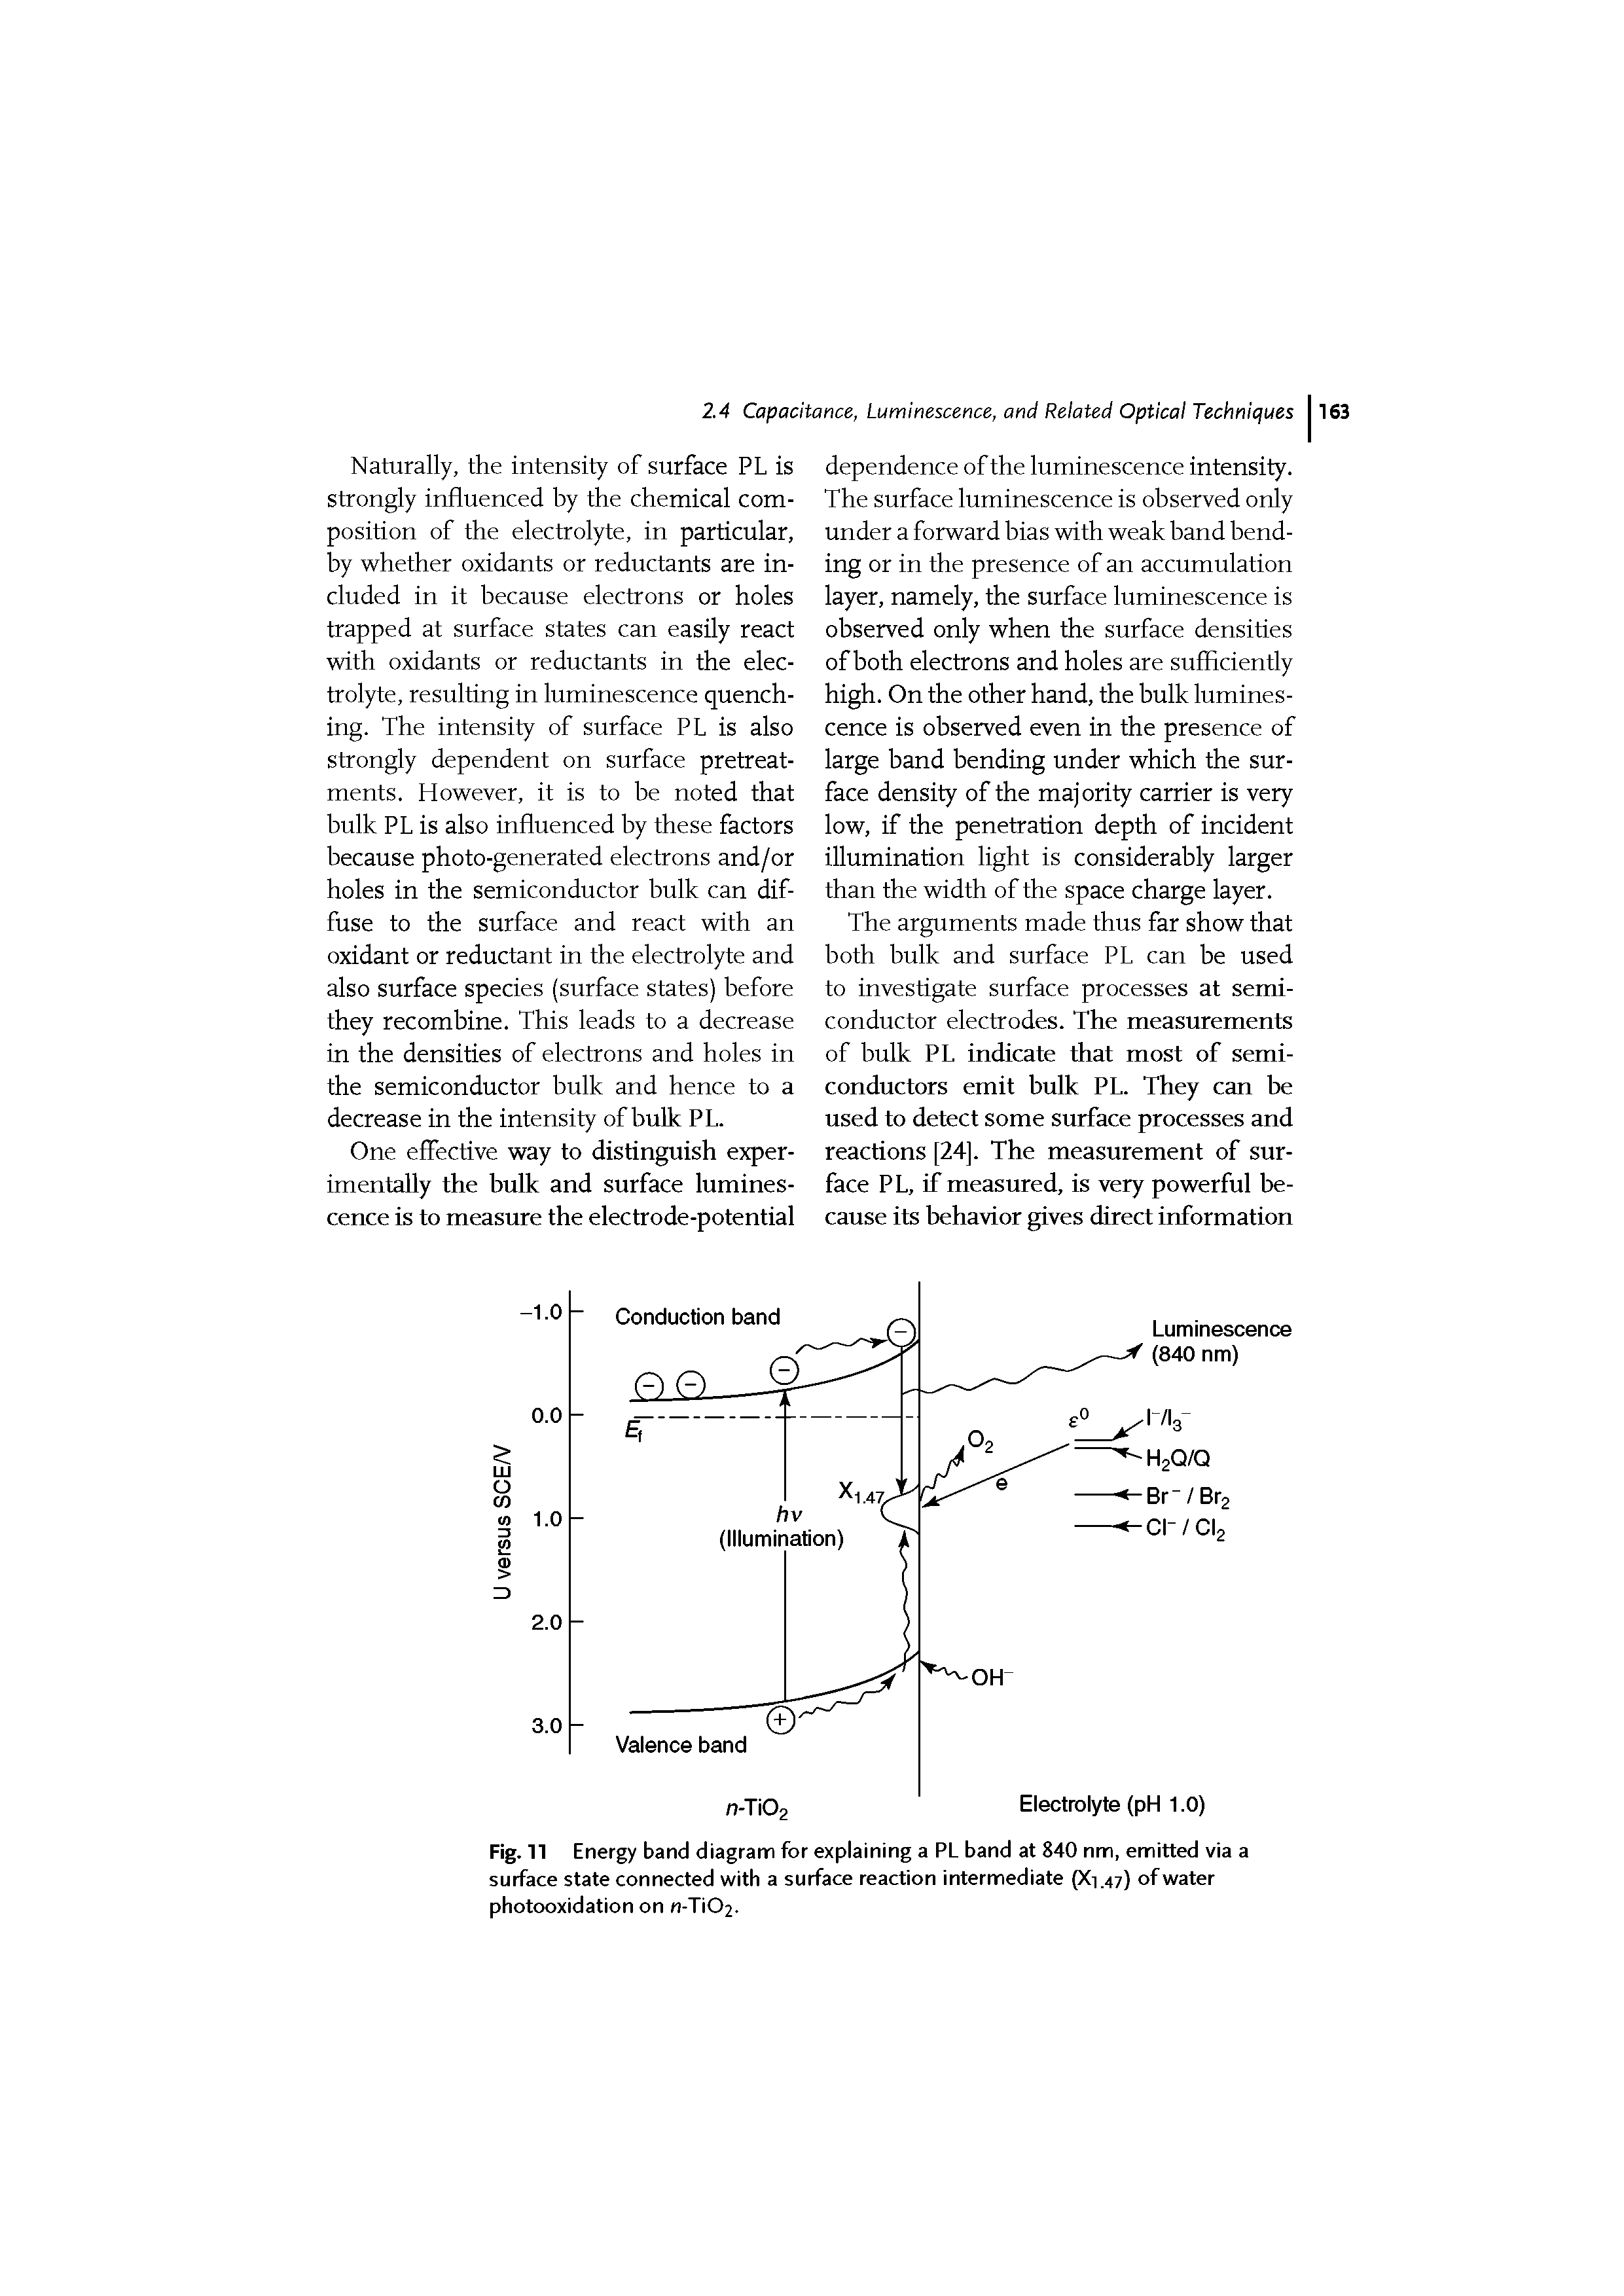 Fig. 11 Energy band diagram for explaining a PL band at 840 nm, emitted via a surface state connected with a surface reaction intermediate (X1.47) of water photooxidation on n-Ti02-...